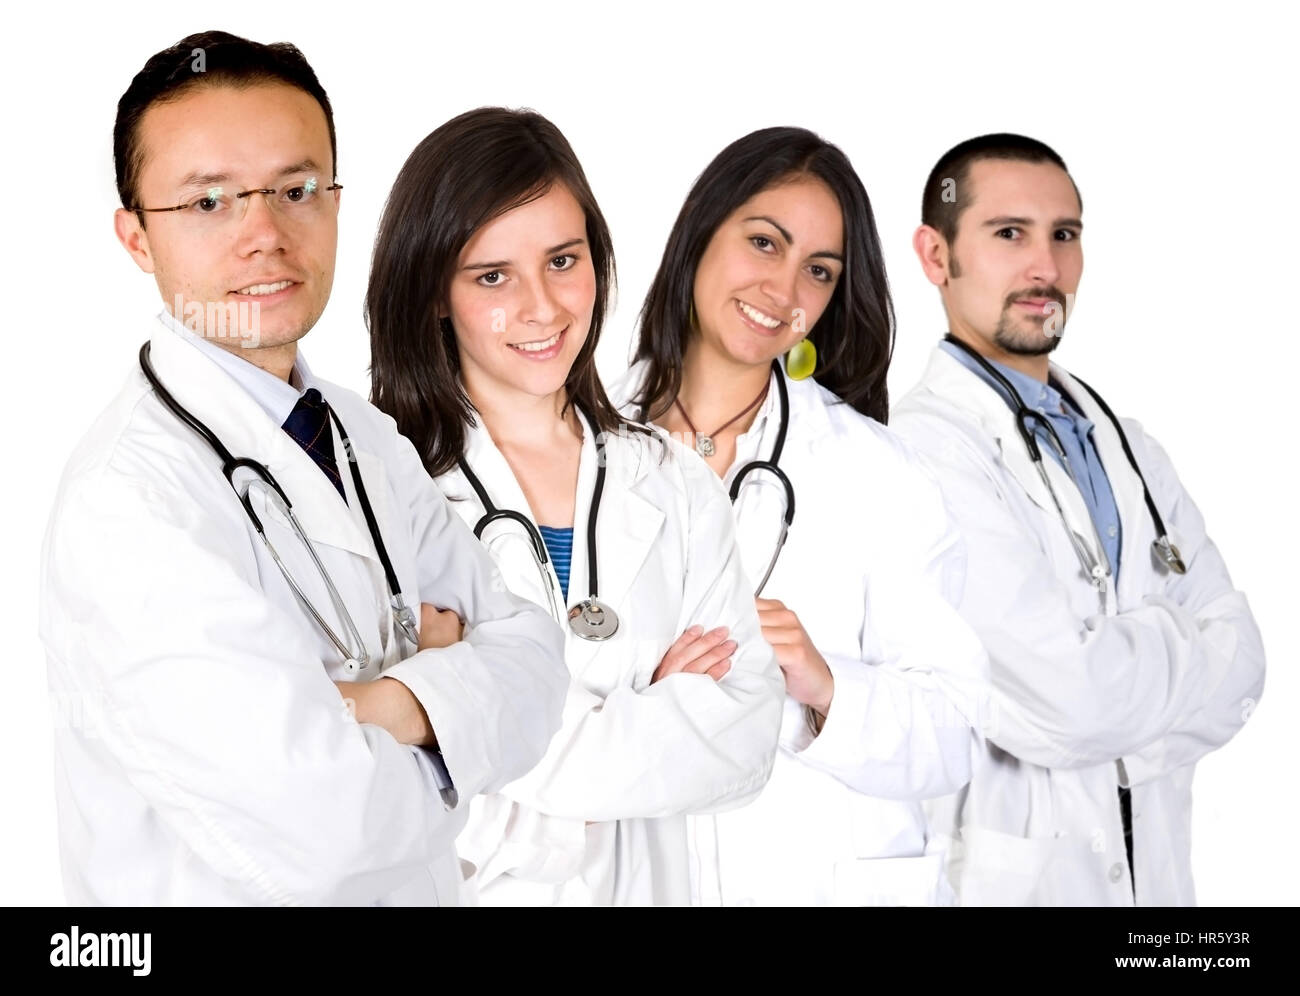 medical team with male and female doctors over a white background Stock Photo